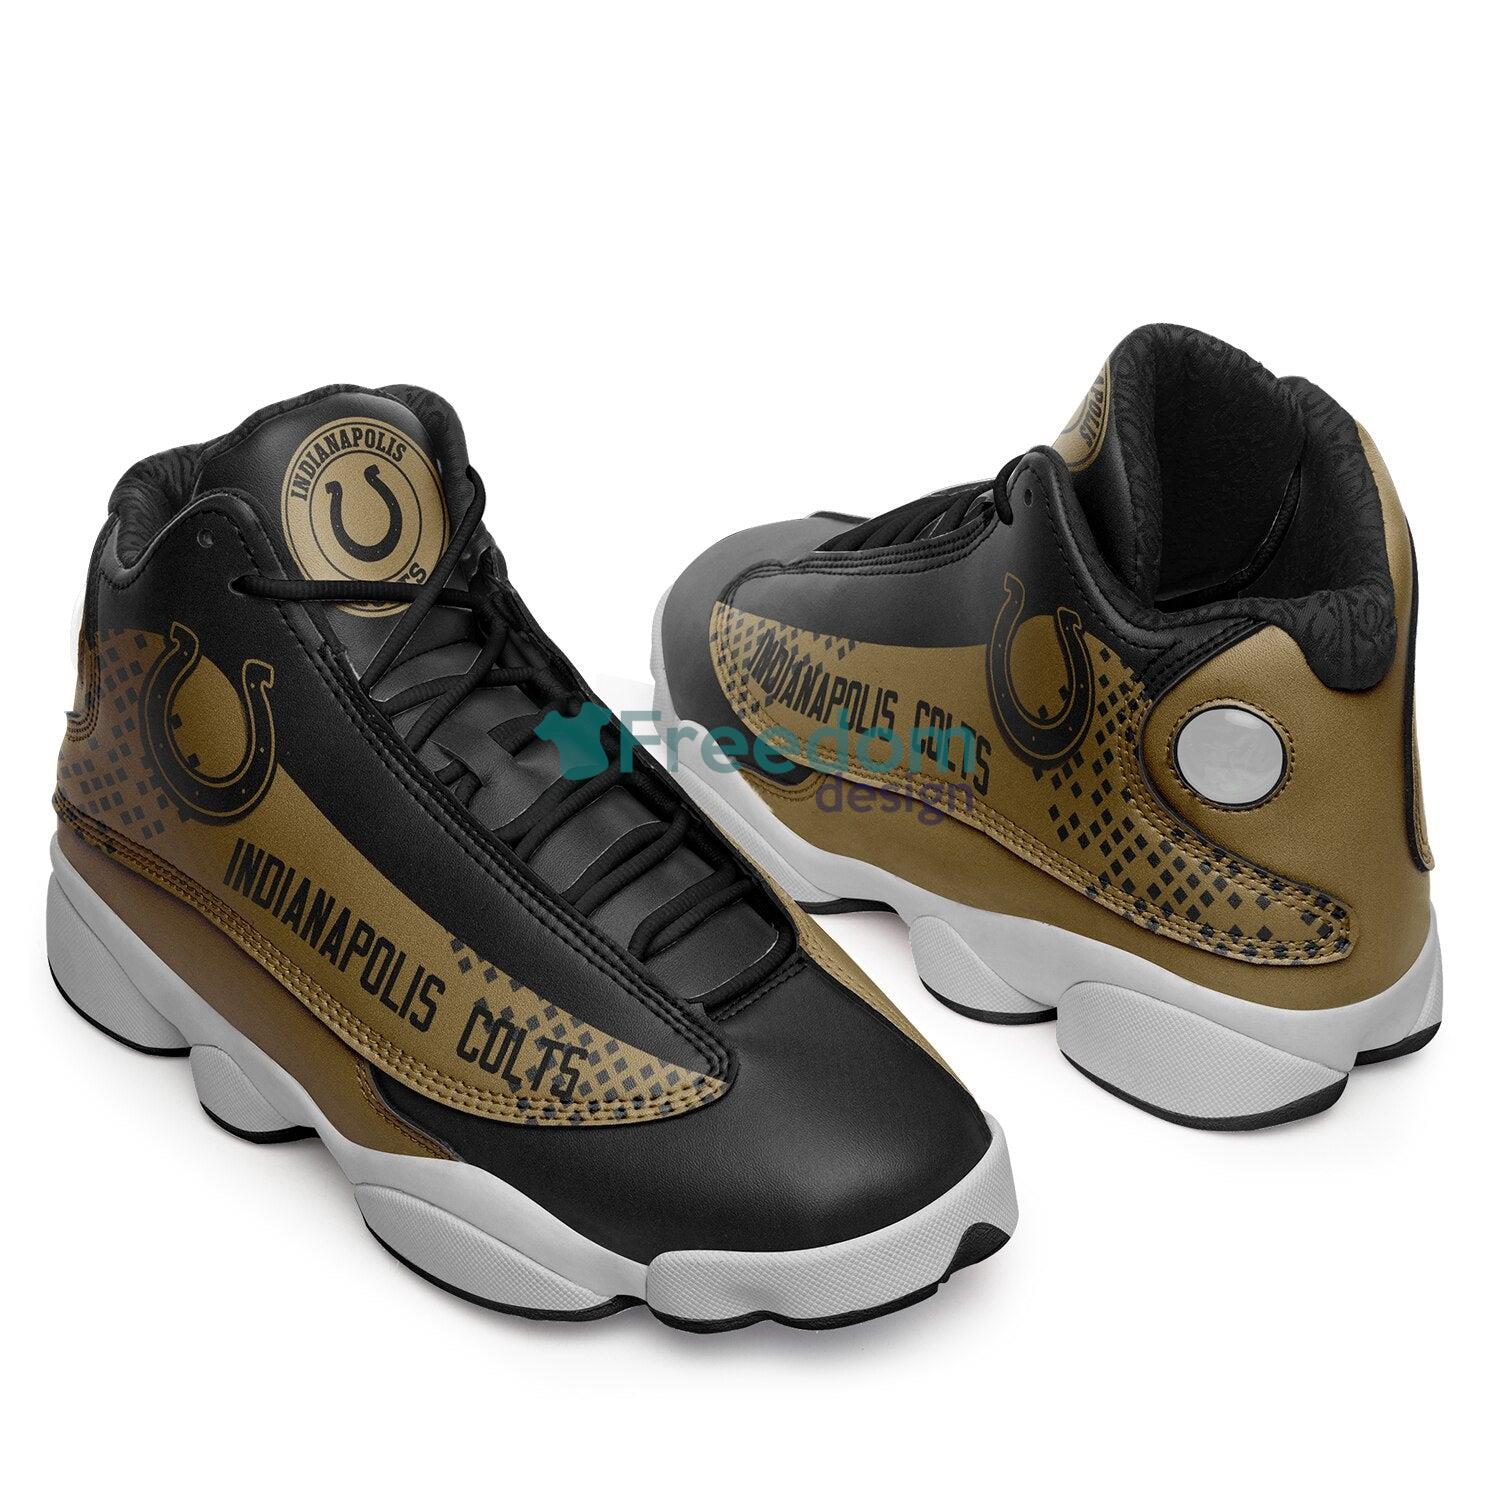 Indianapolis Colts Team Air Jordan 13 Sneaker Shoes For Fans